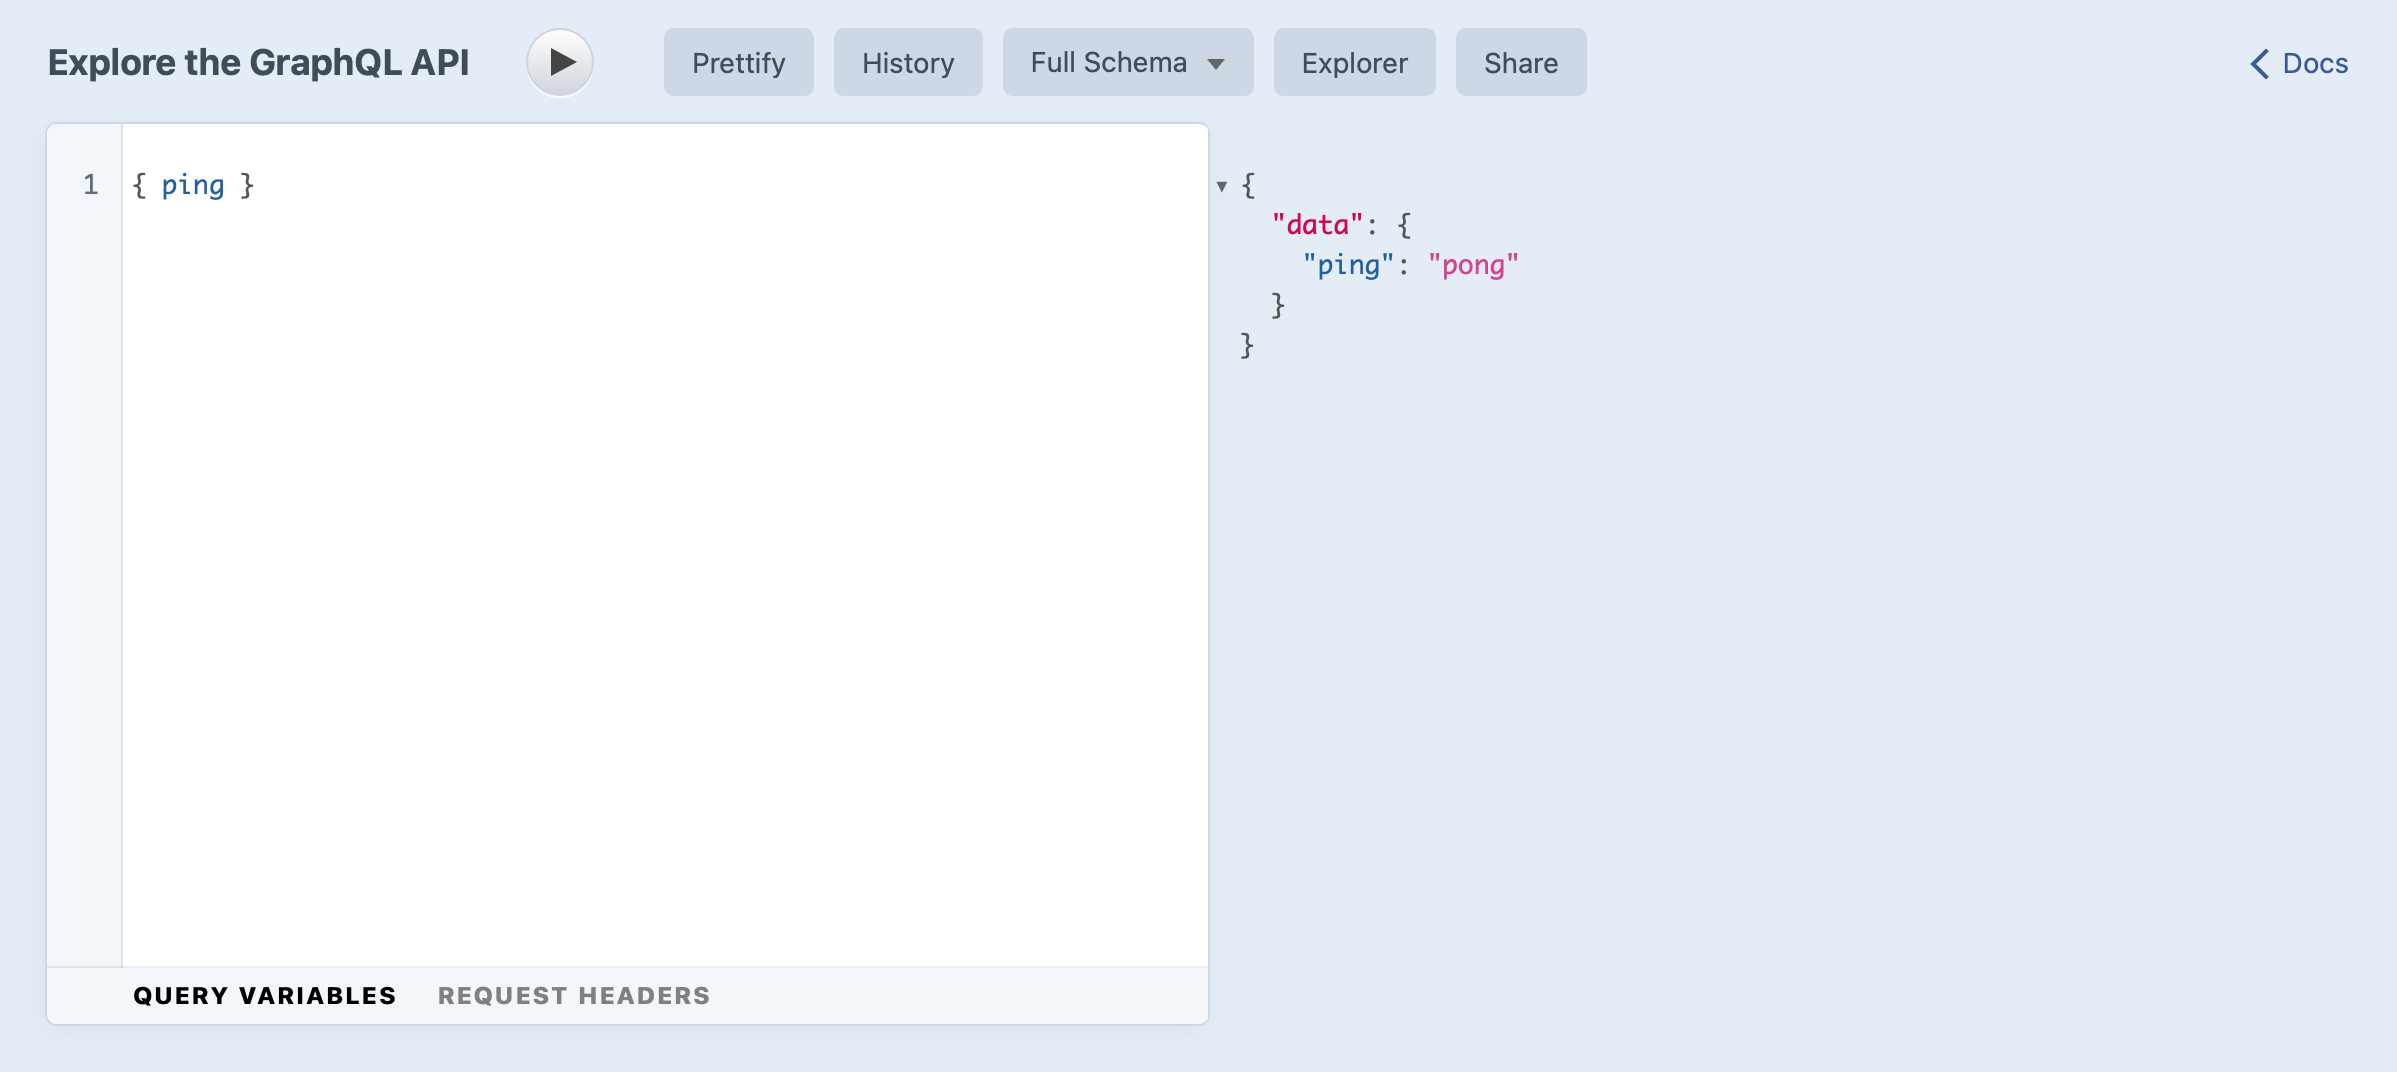 Screenshot of GraphiQL with simple query and response